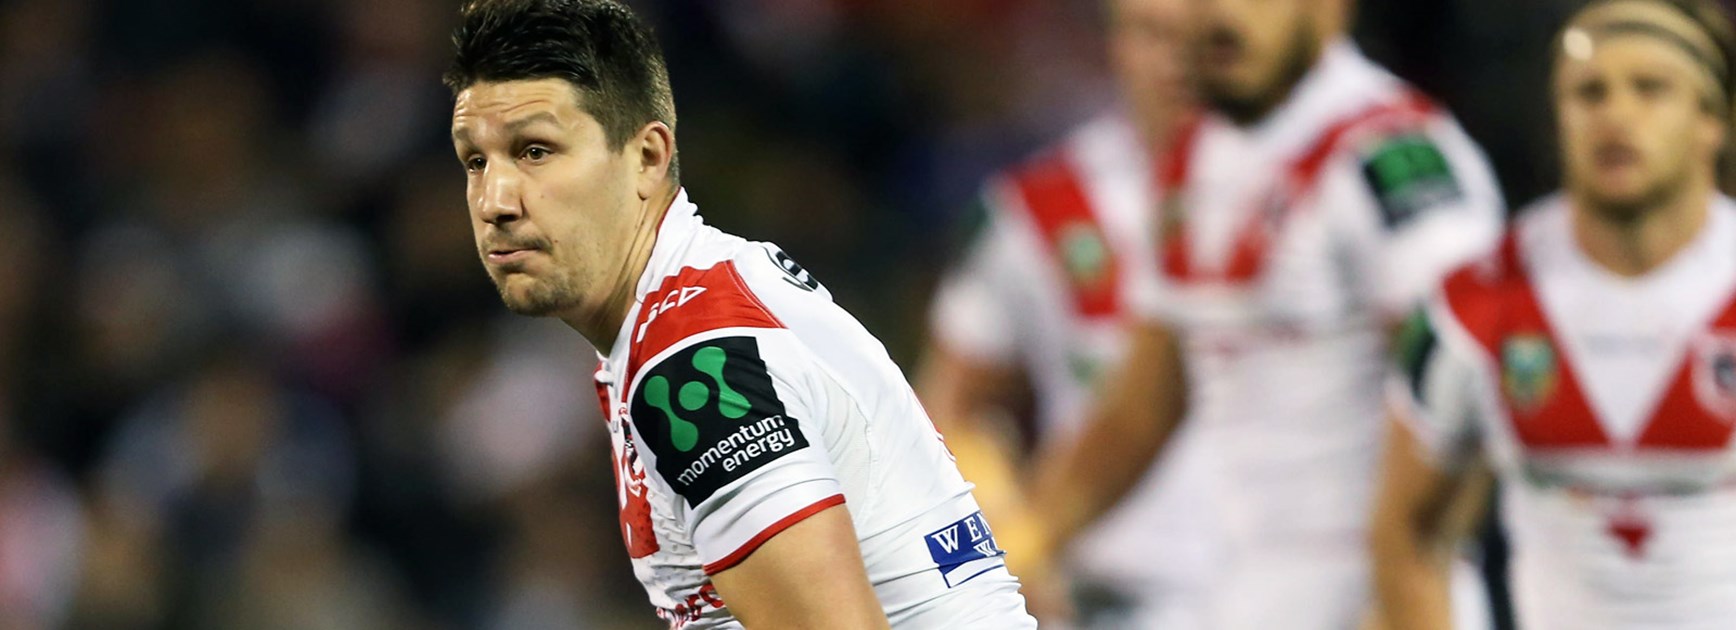 Dragons five-eighth Gareth Widdop scored the match-sealing try in Round 24.